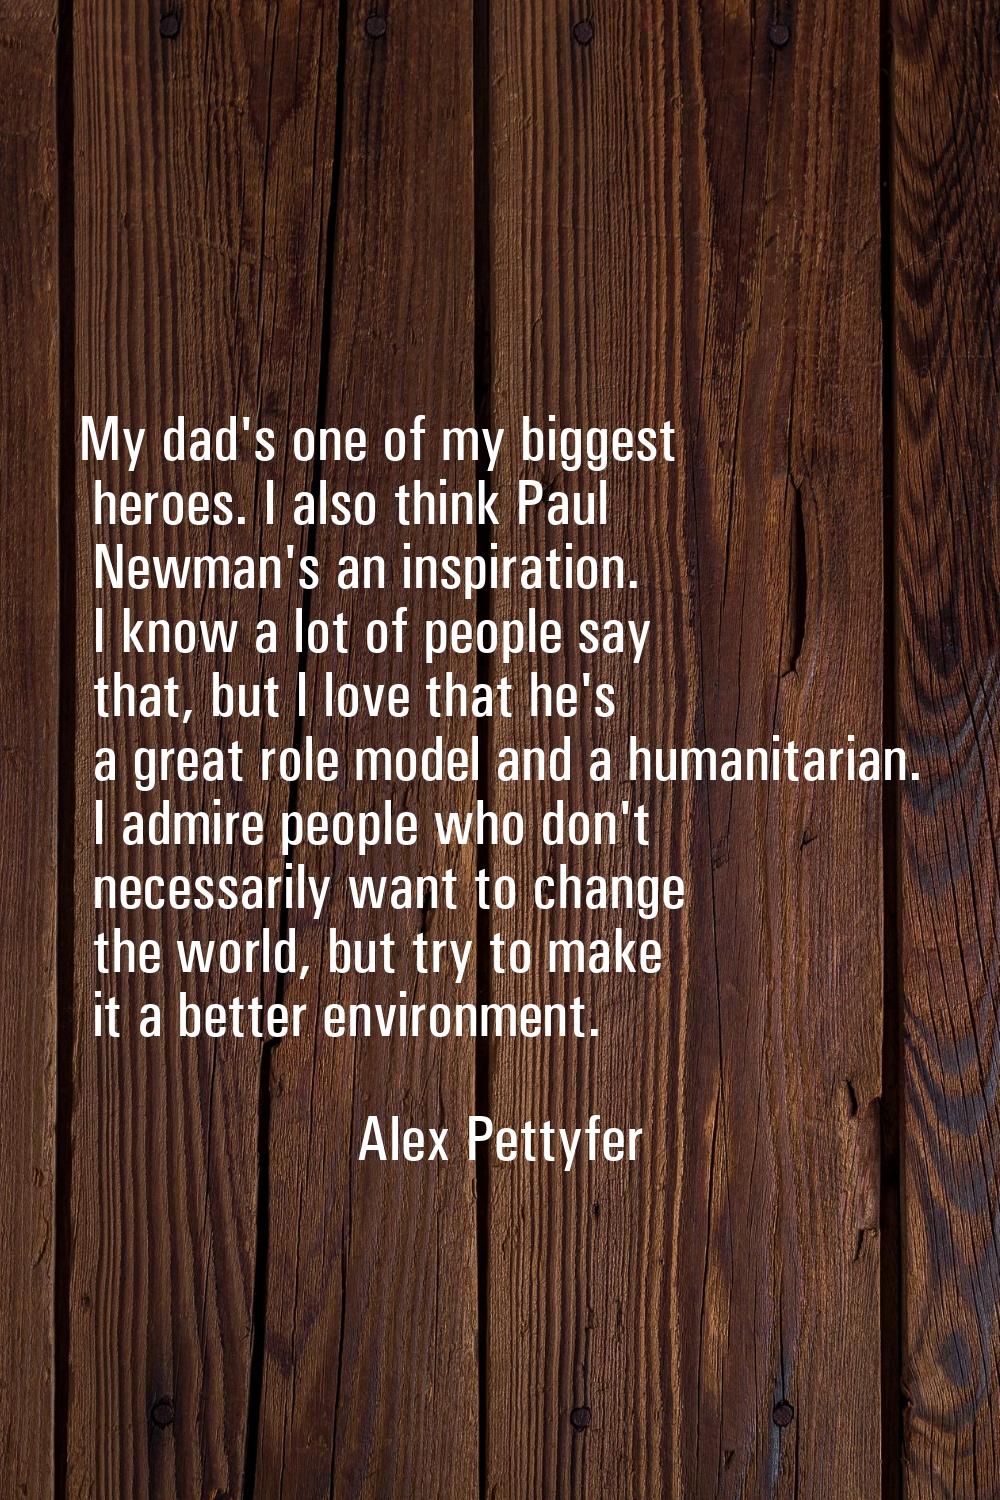 My dad's one of my biggest heroes. I also think Paul Newman's an inspiration. I know a lot of peopl